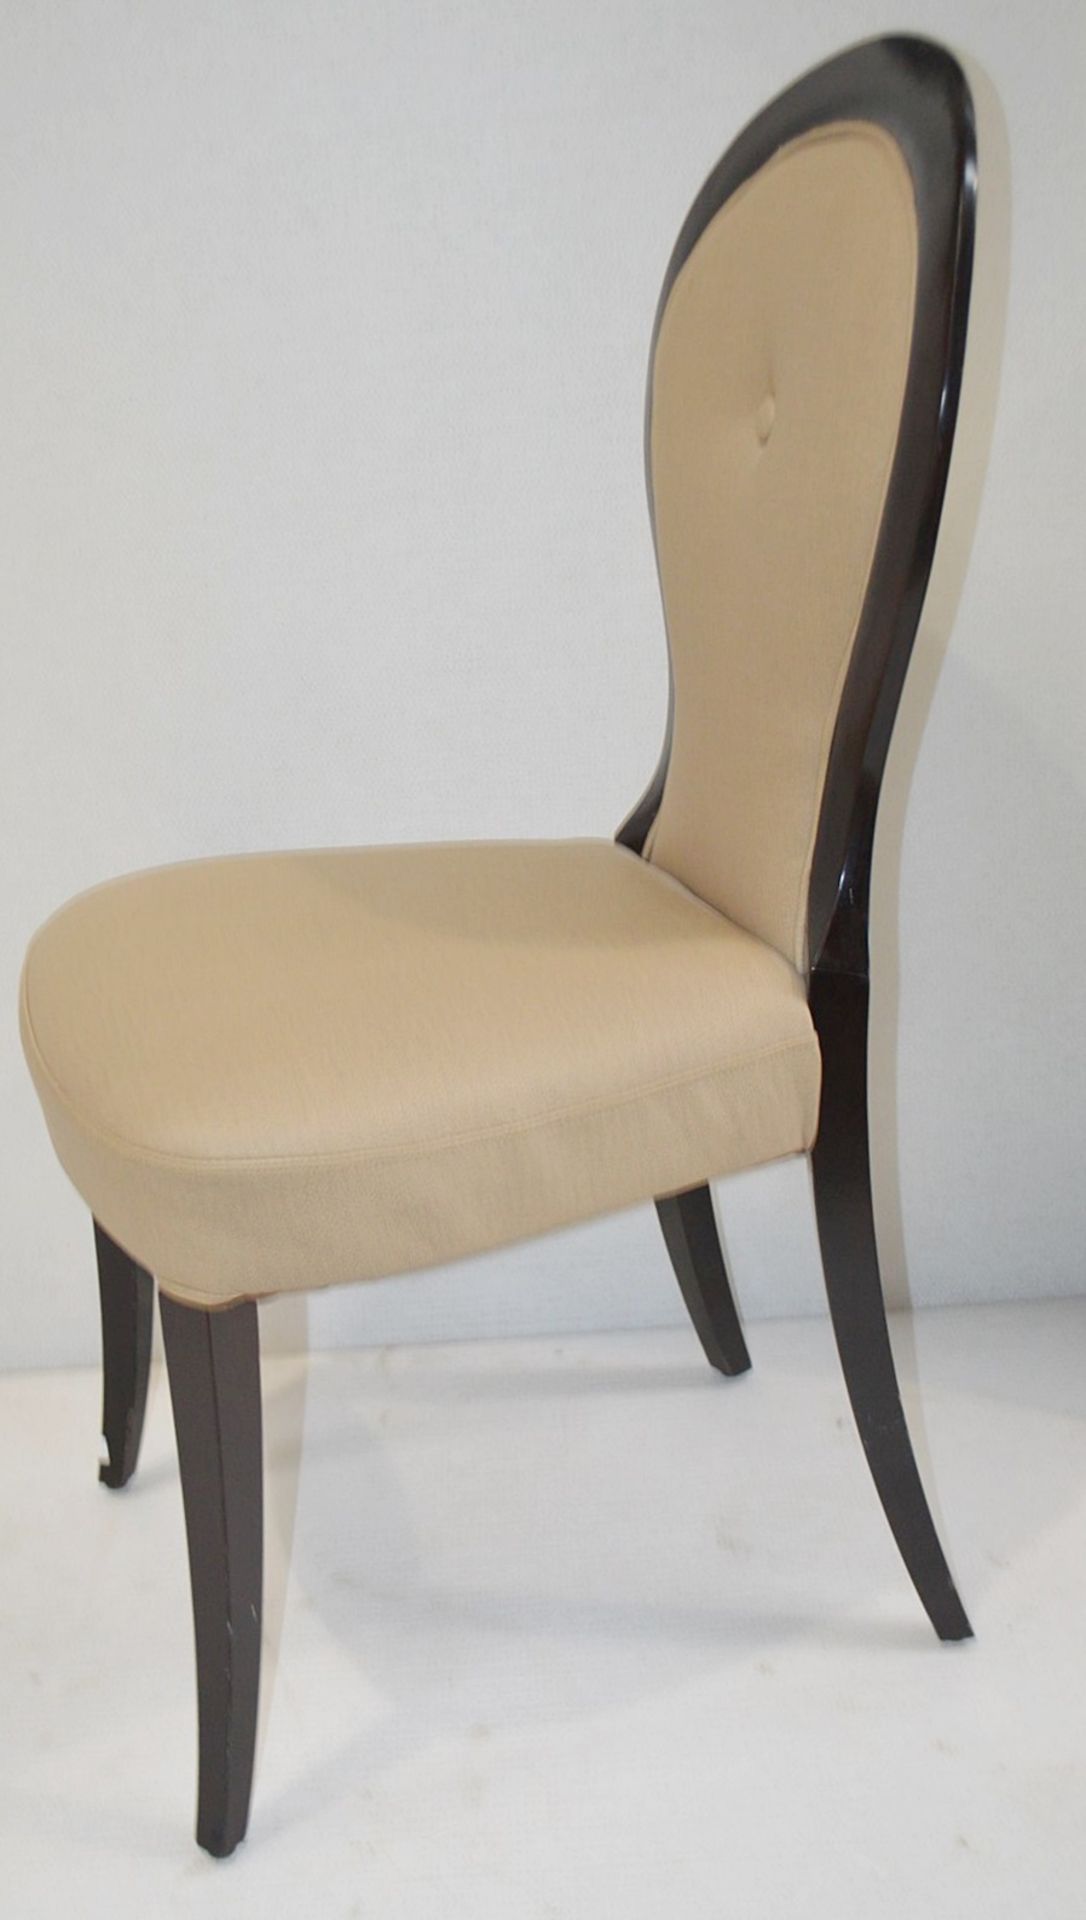 1 x Cushion Backed Chair With Curved Legs - Dimensions: H100 x W49 x D50cm / Seat 48cm - Ref: HMS127